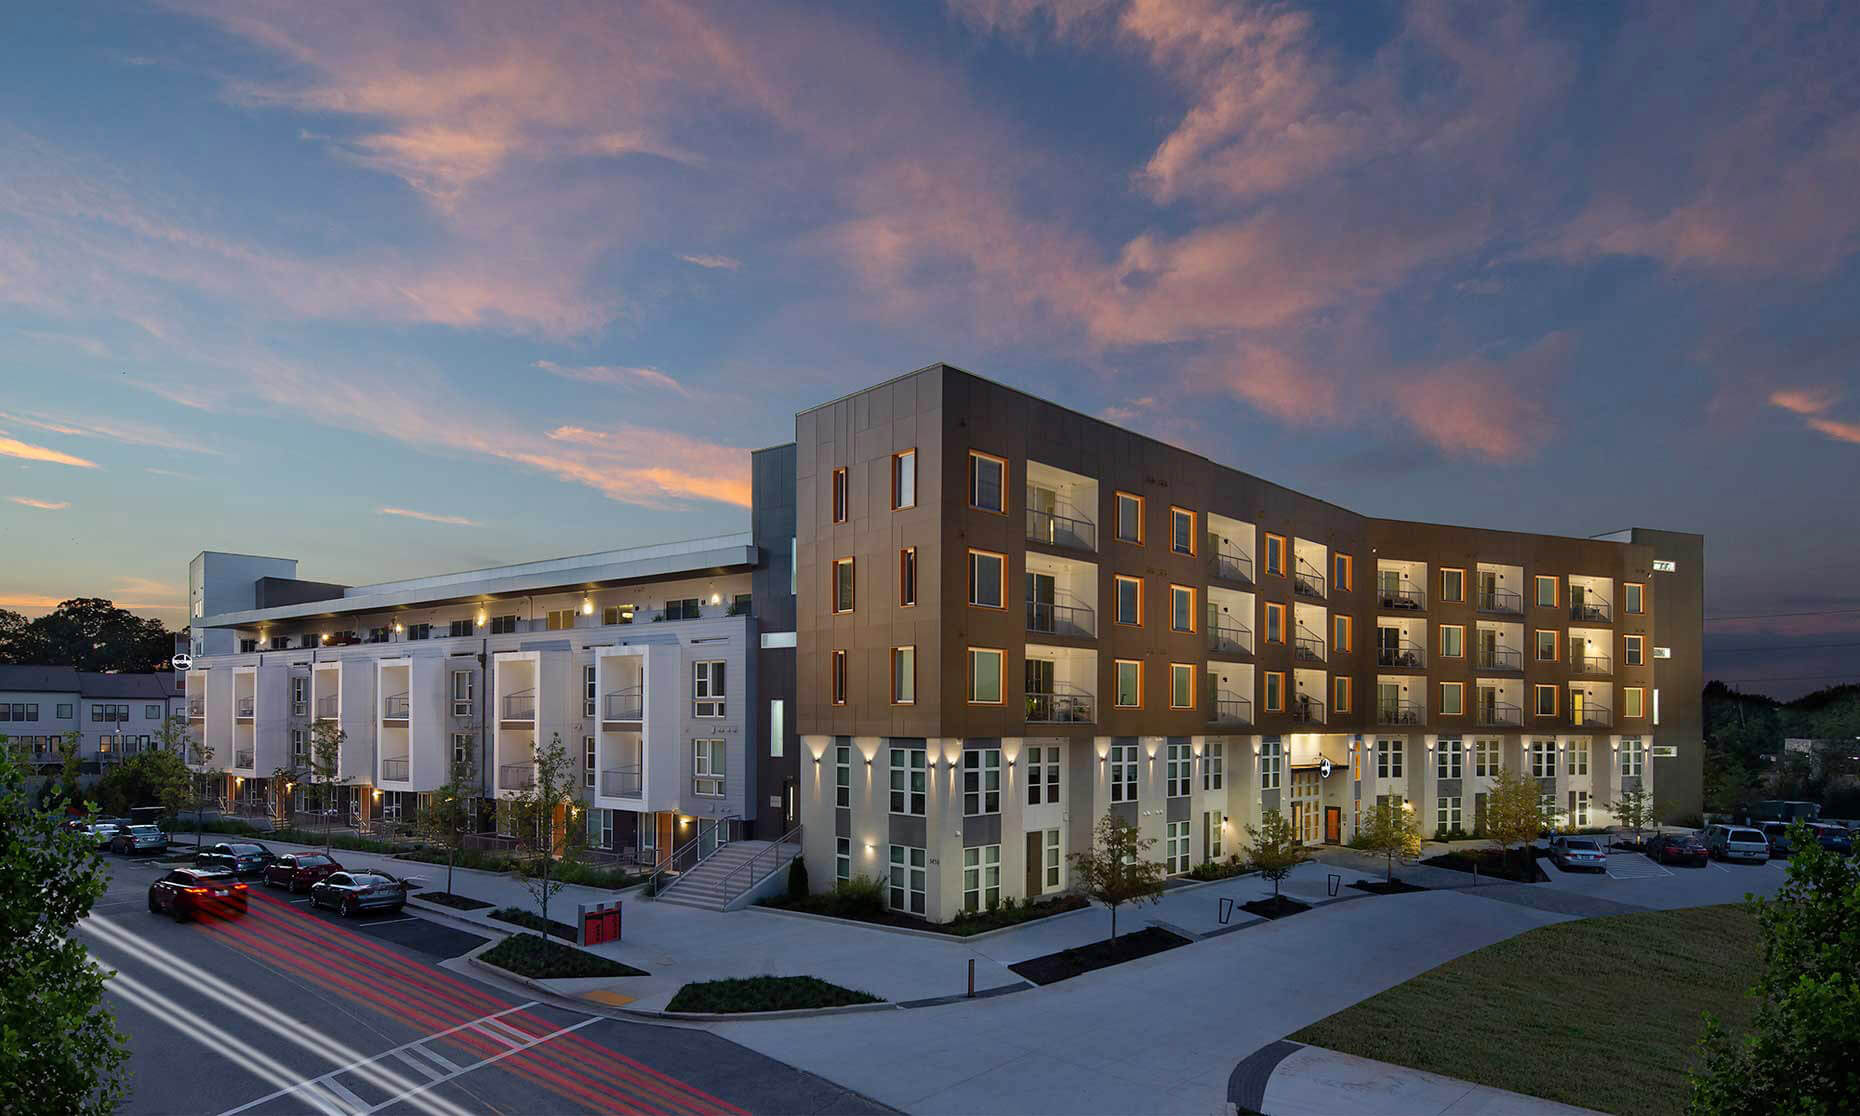 An elevated view at twilight of the Spoke at Edgewood-Candler Apartment Community